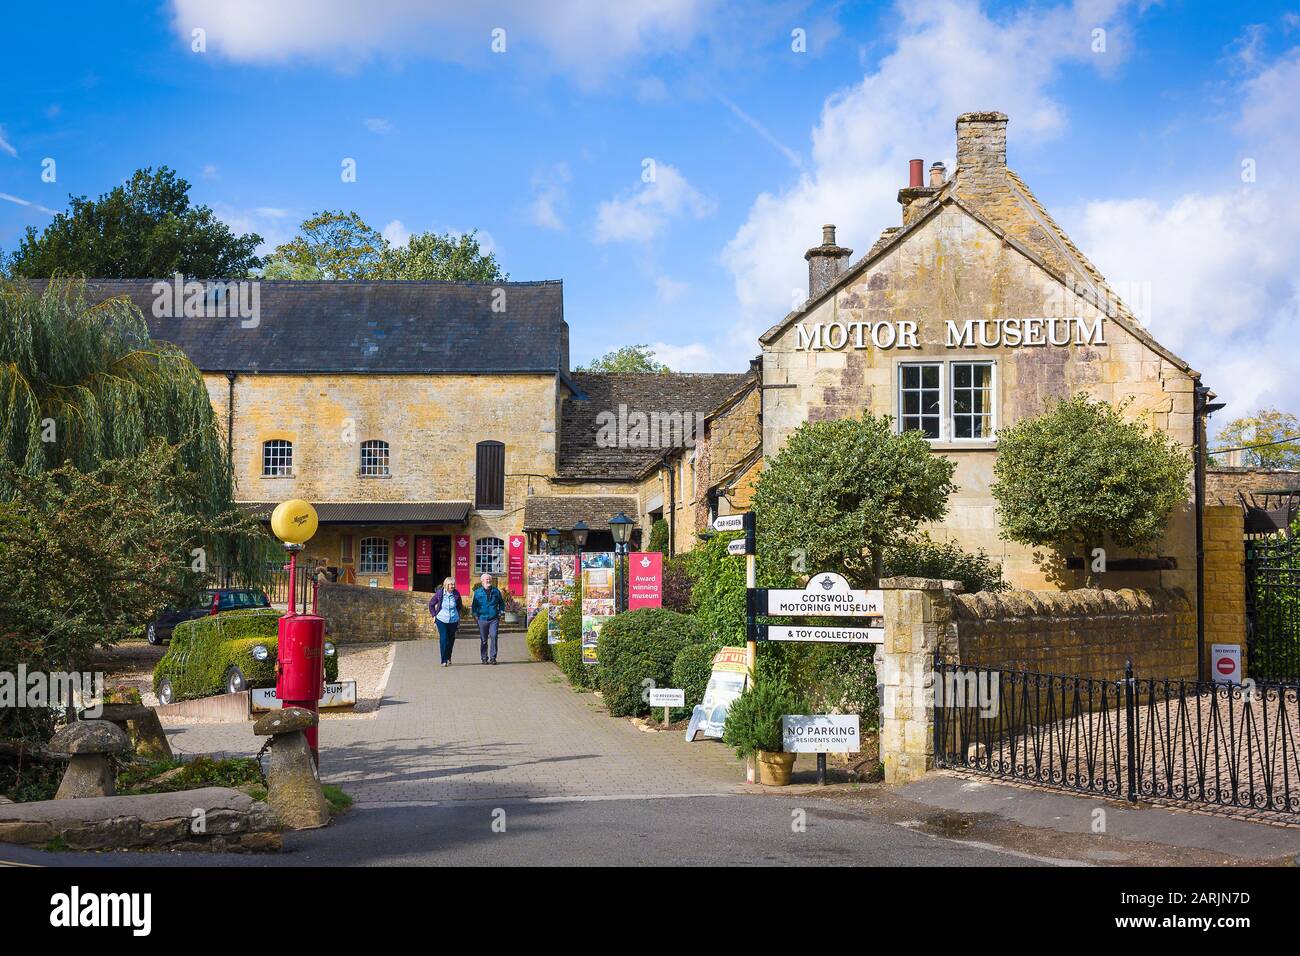 The Motor Museum in the Cotswold village of Bourton-on-the-Water is one of the main tourist attractions. Stock Photo